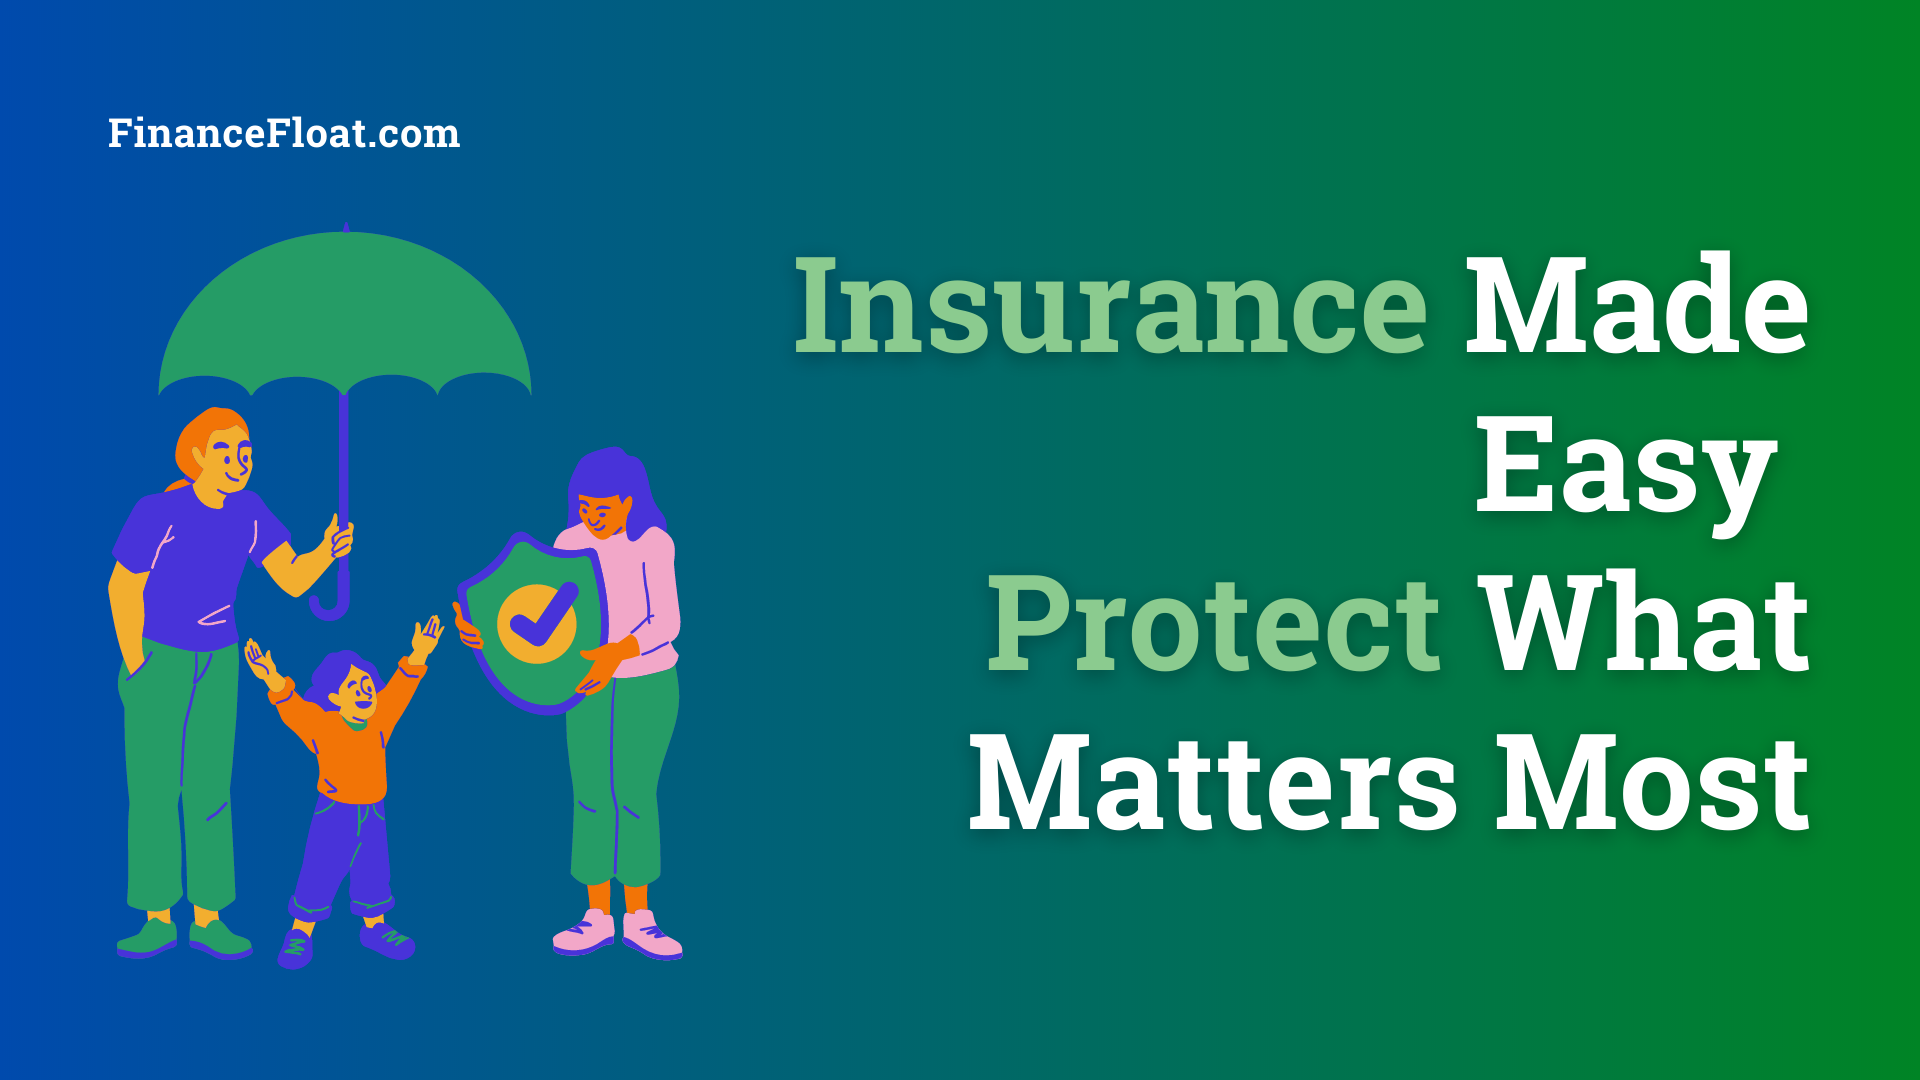 Insurance Made Easy Protect What Matters Most